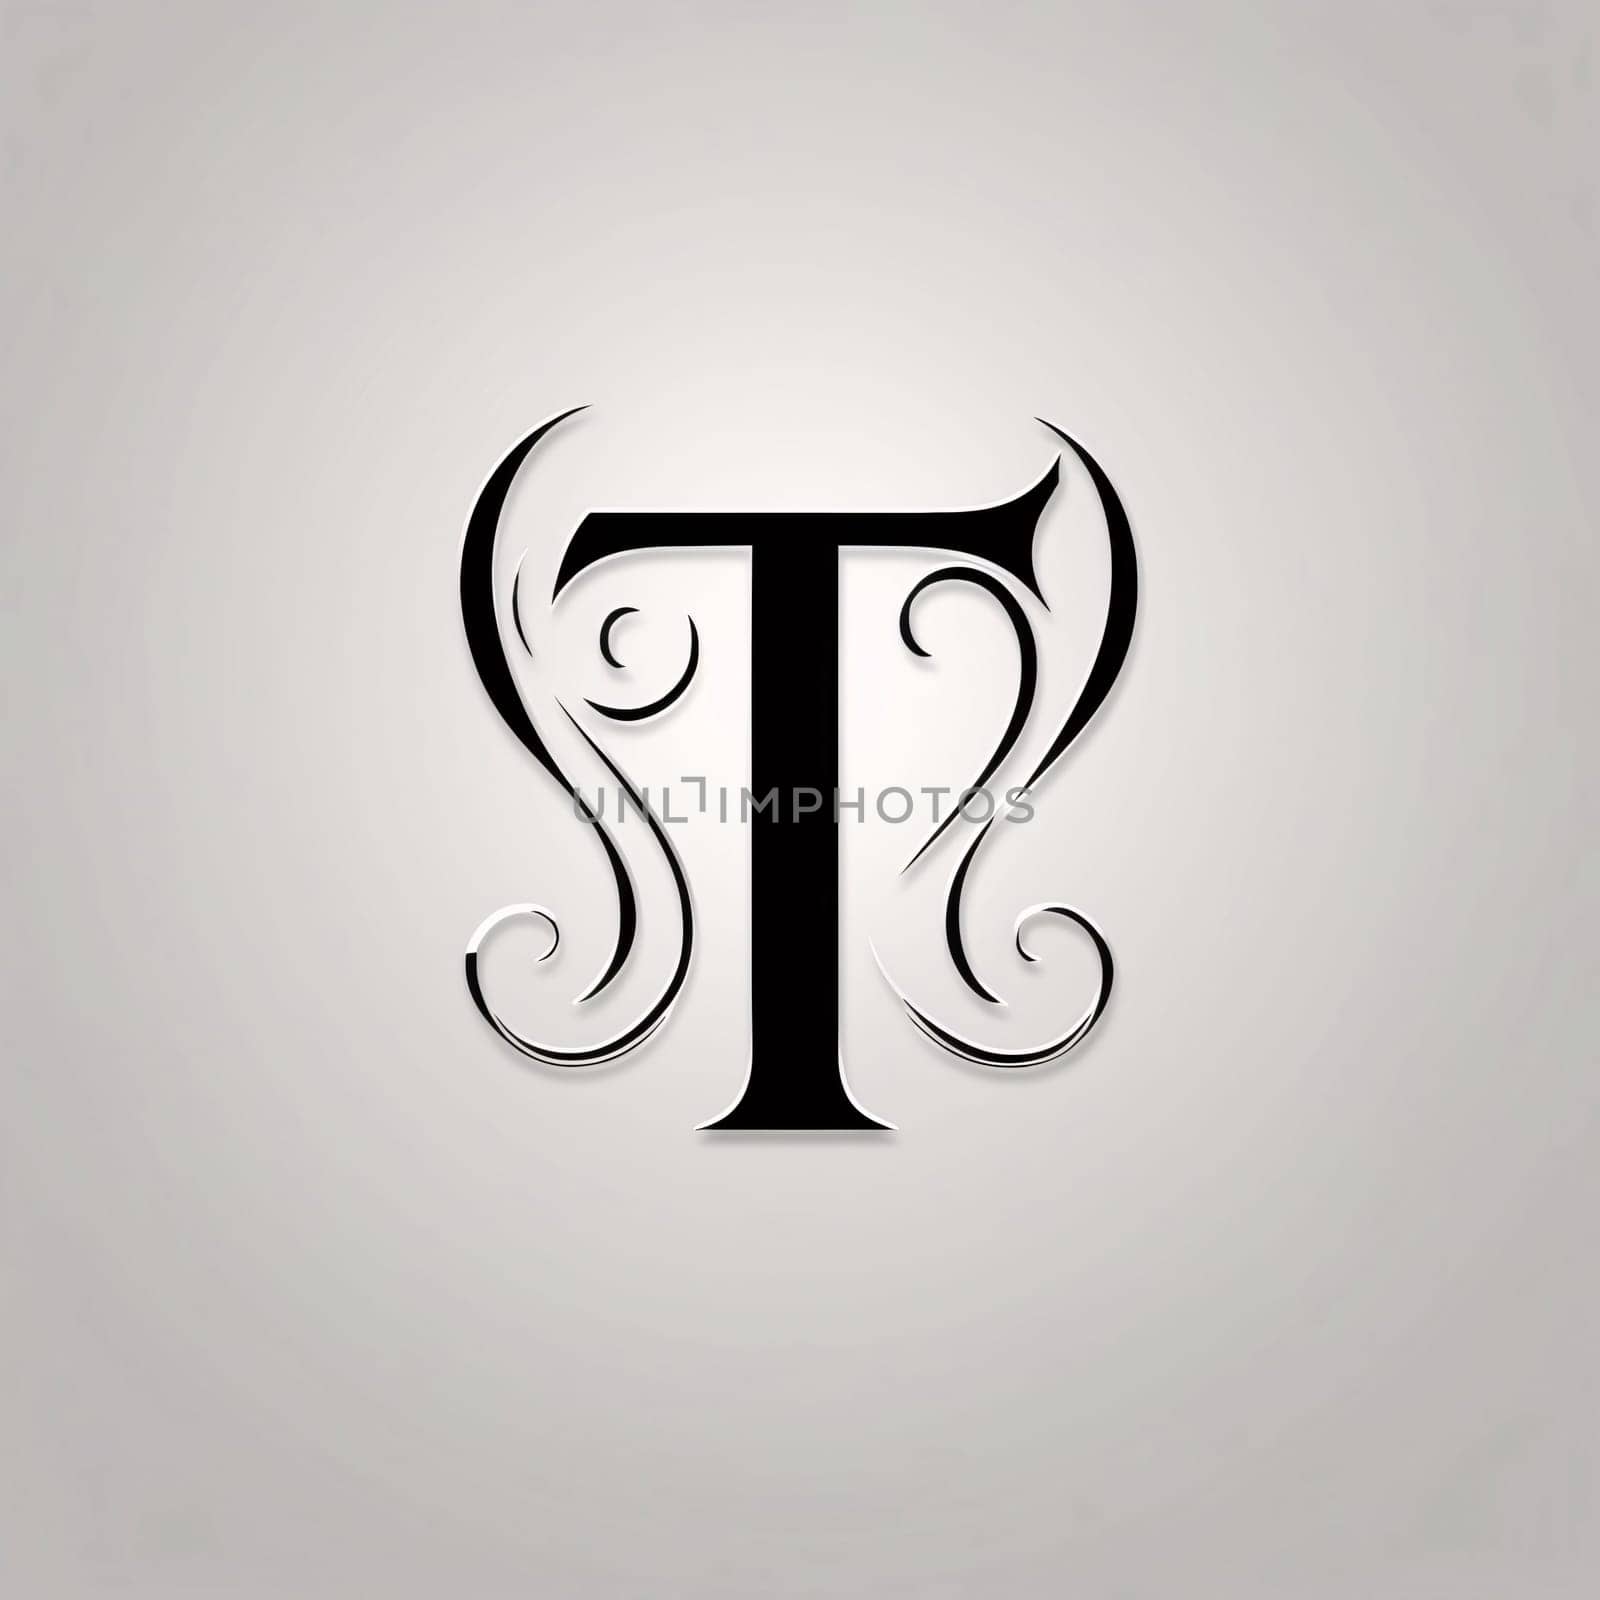 Graphic alphabet letters: Abstract Elegant Letter T Icon Design Template. Vector Illustration